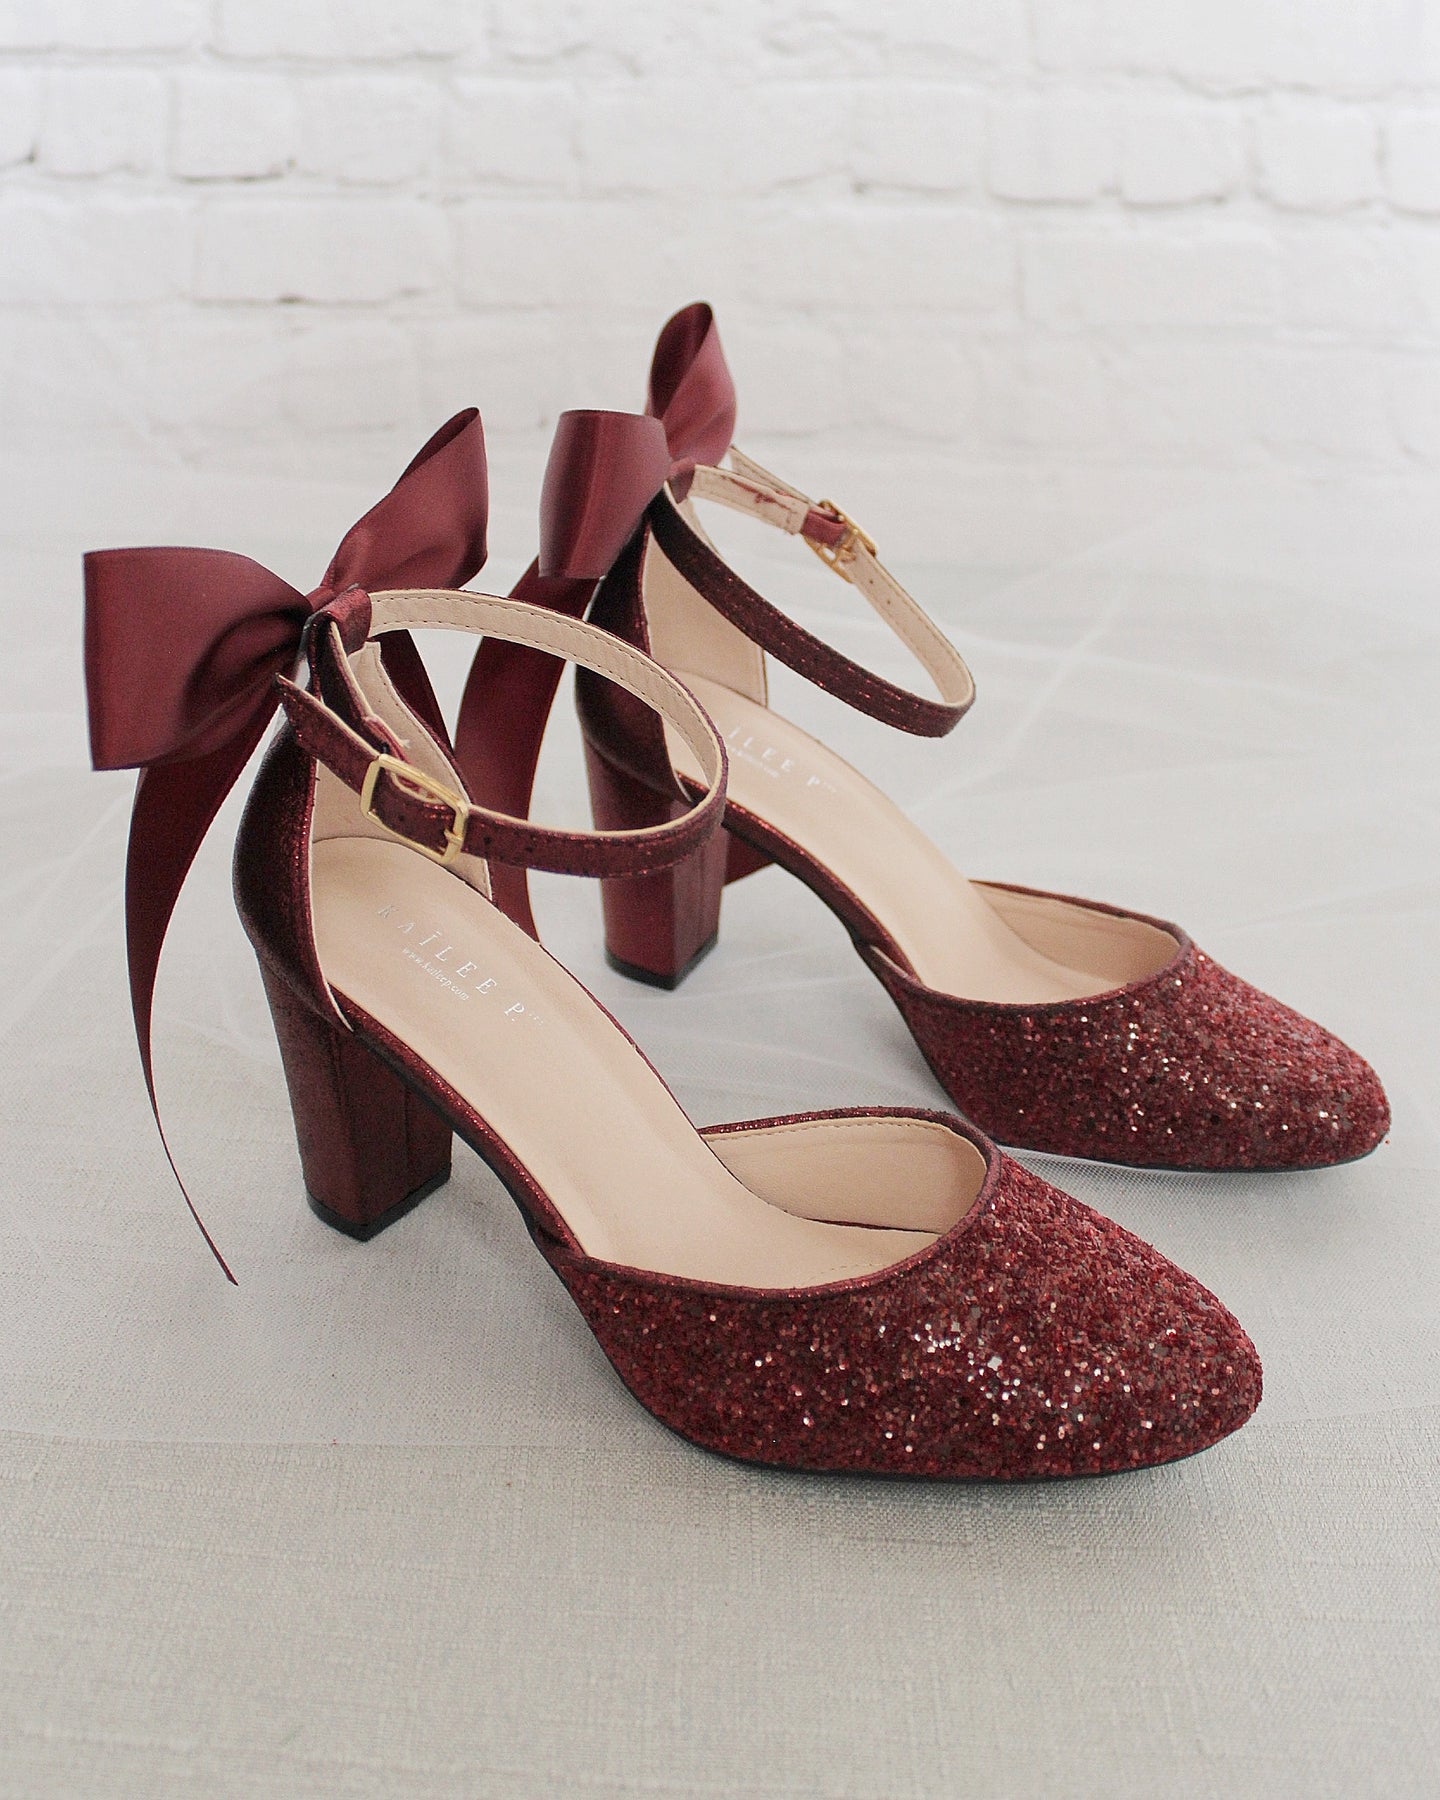 Add more sparkle items this season: Small heel! brunch 2